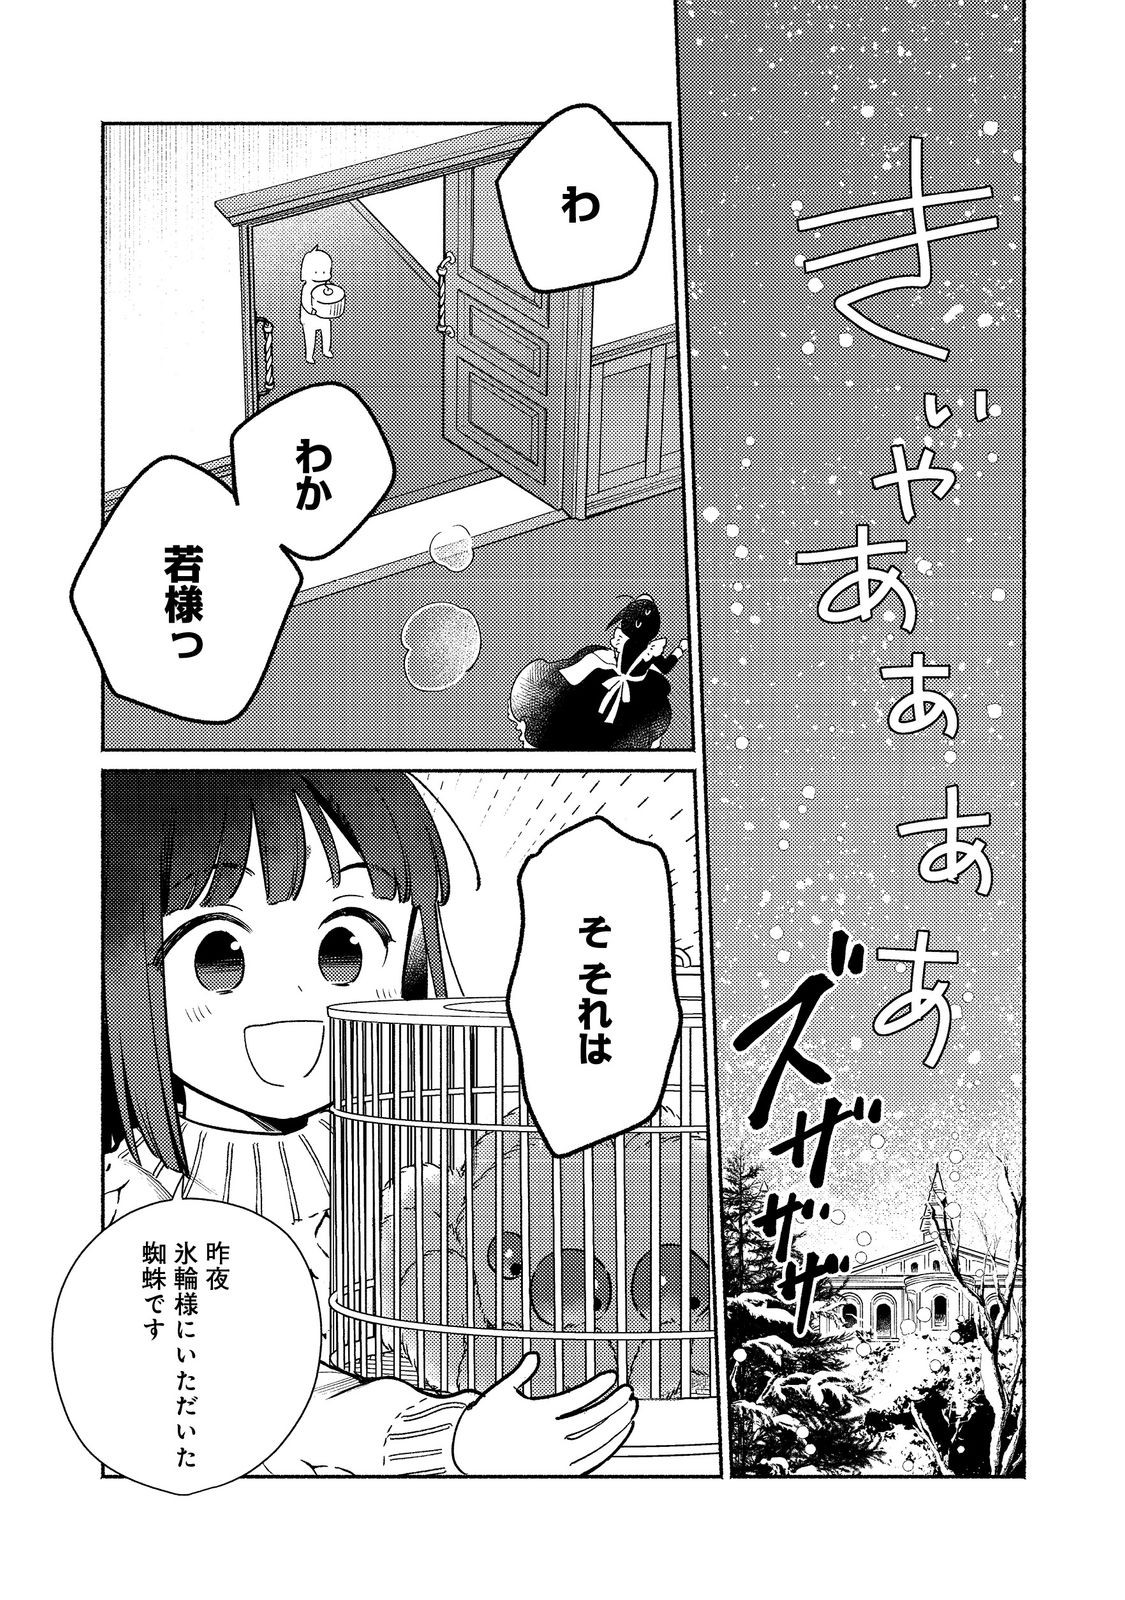 I’m the White Pig Nobleman 第27.1話 - Page 2